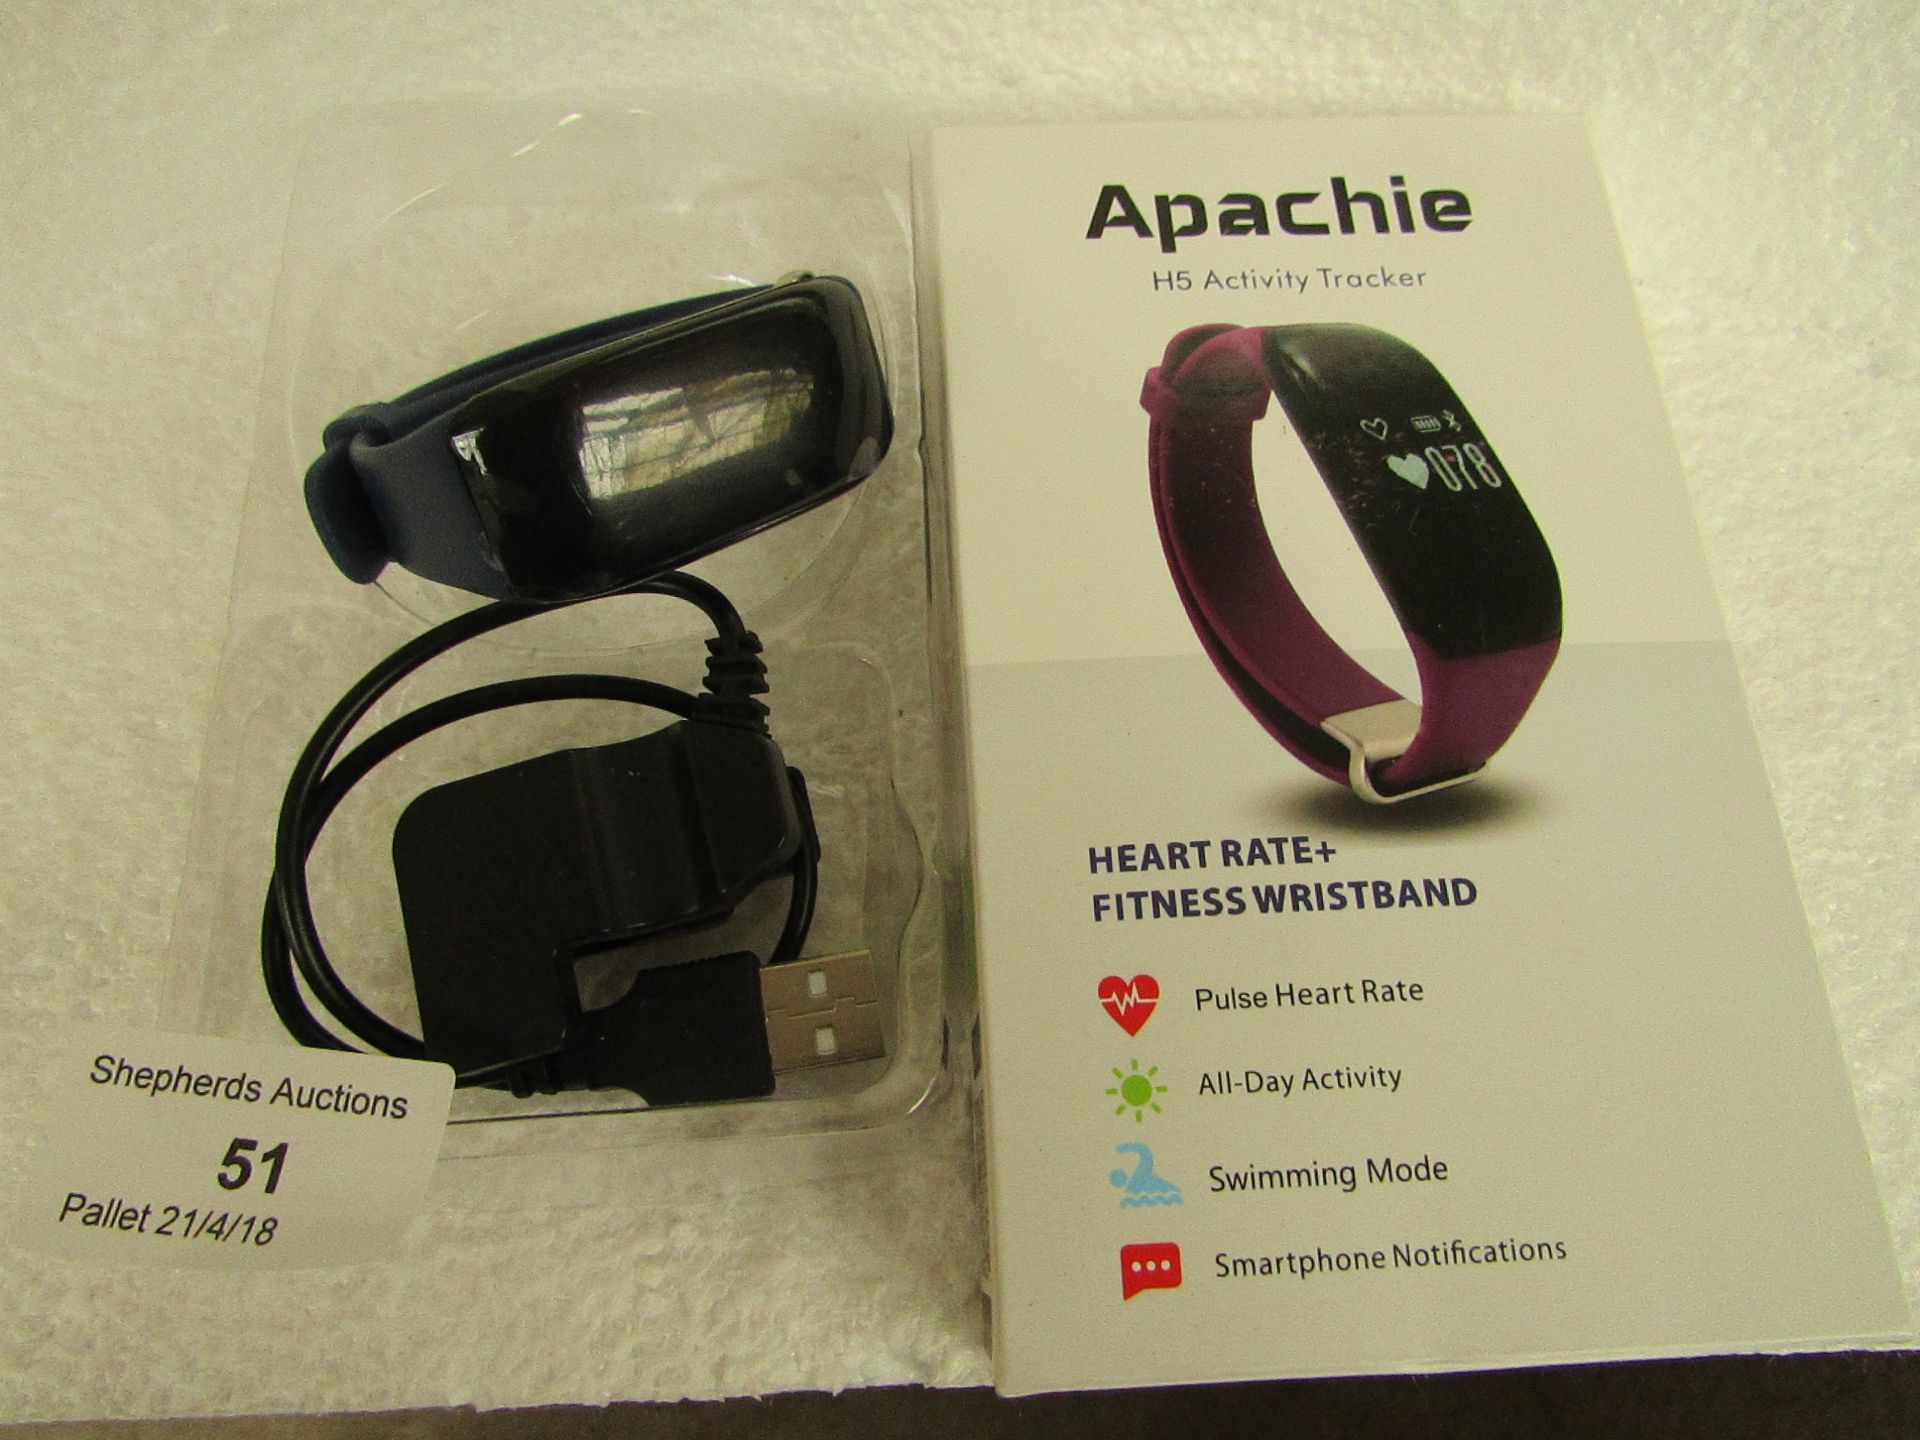 Apachie H5 activity tracker with heart rate tracker, in packaging Please note: we have tested and